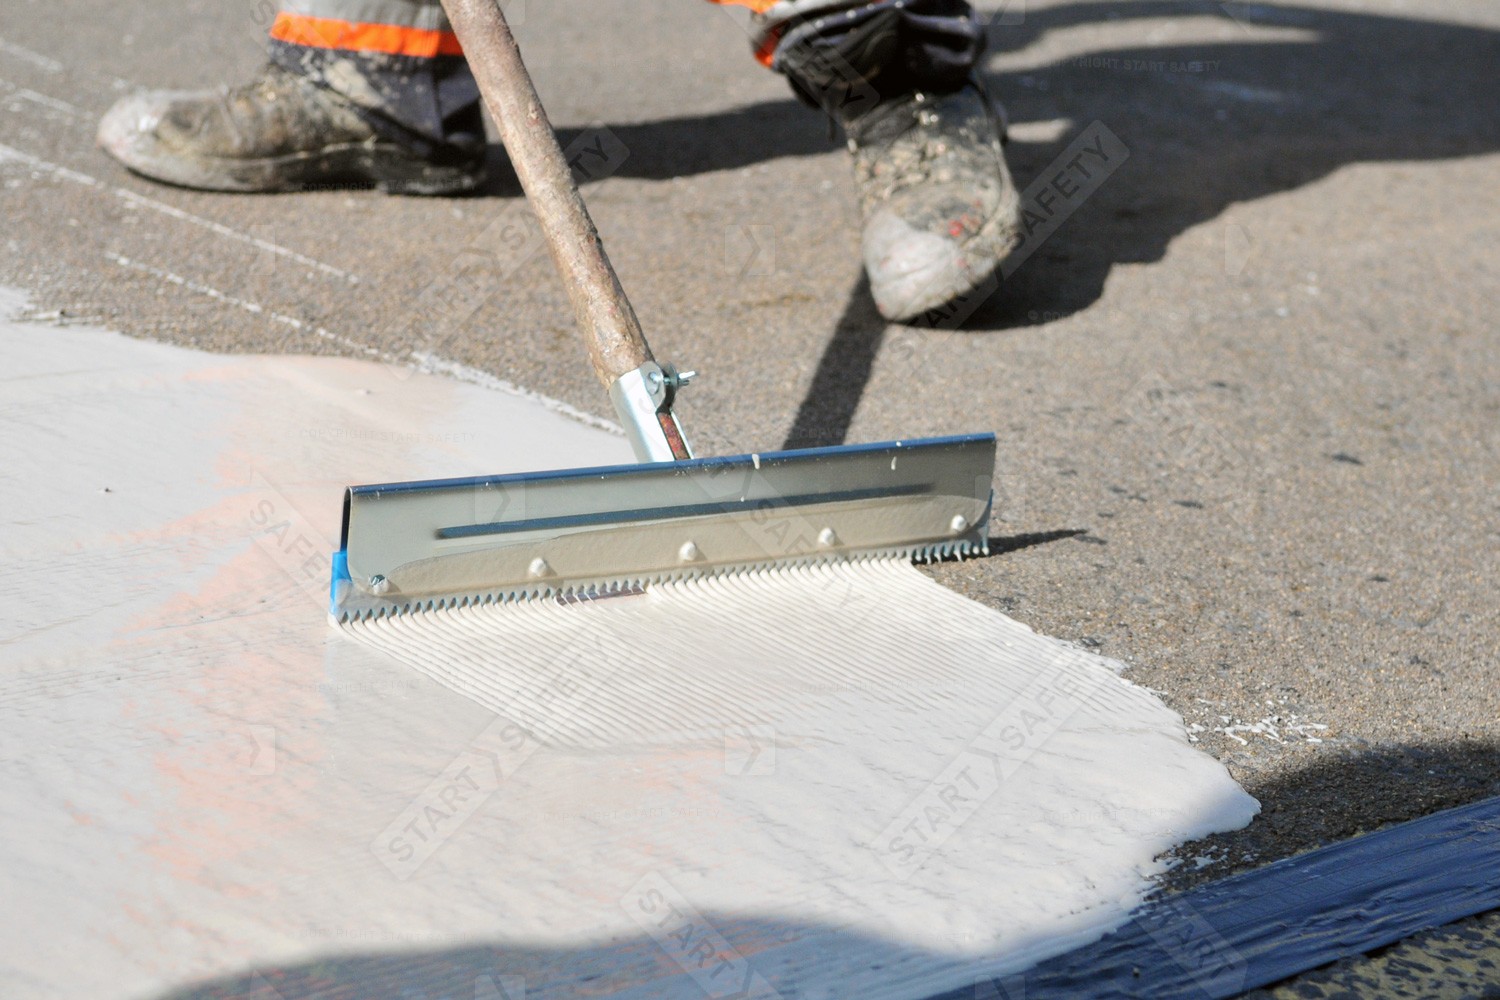 Serrated Squeegee Being Used To spread MMA Floor Coating